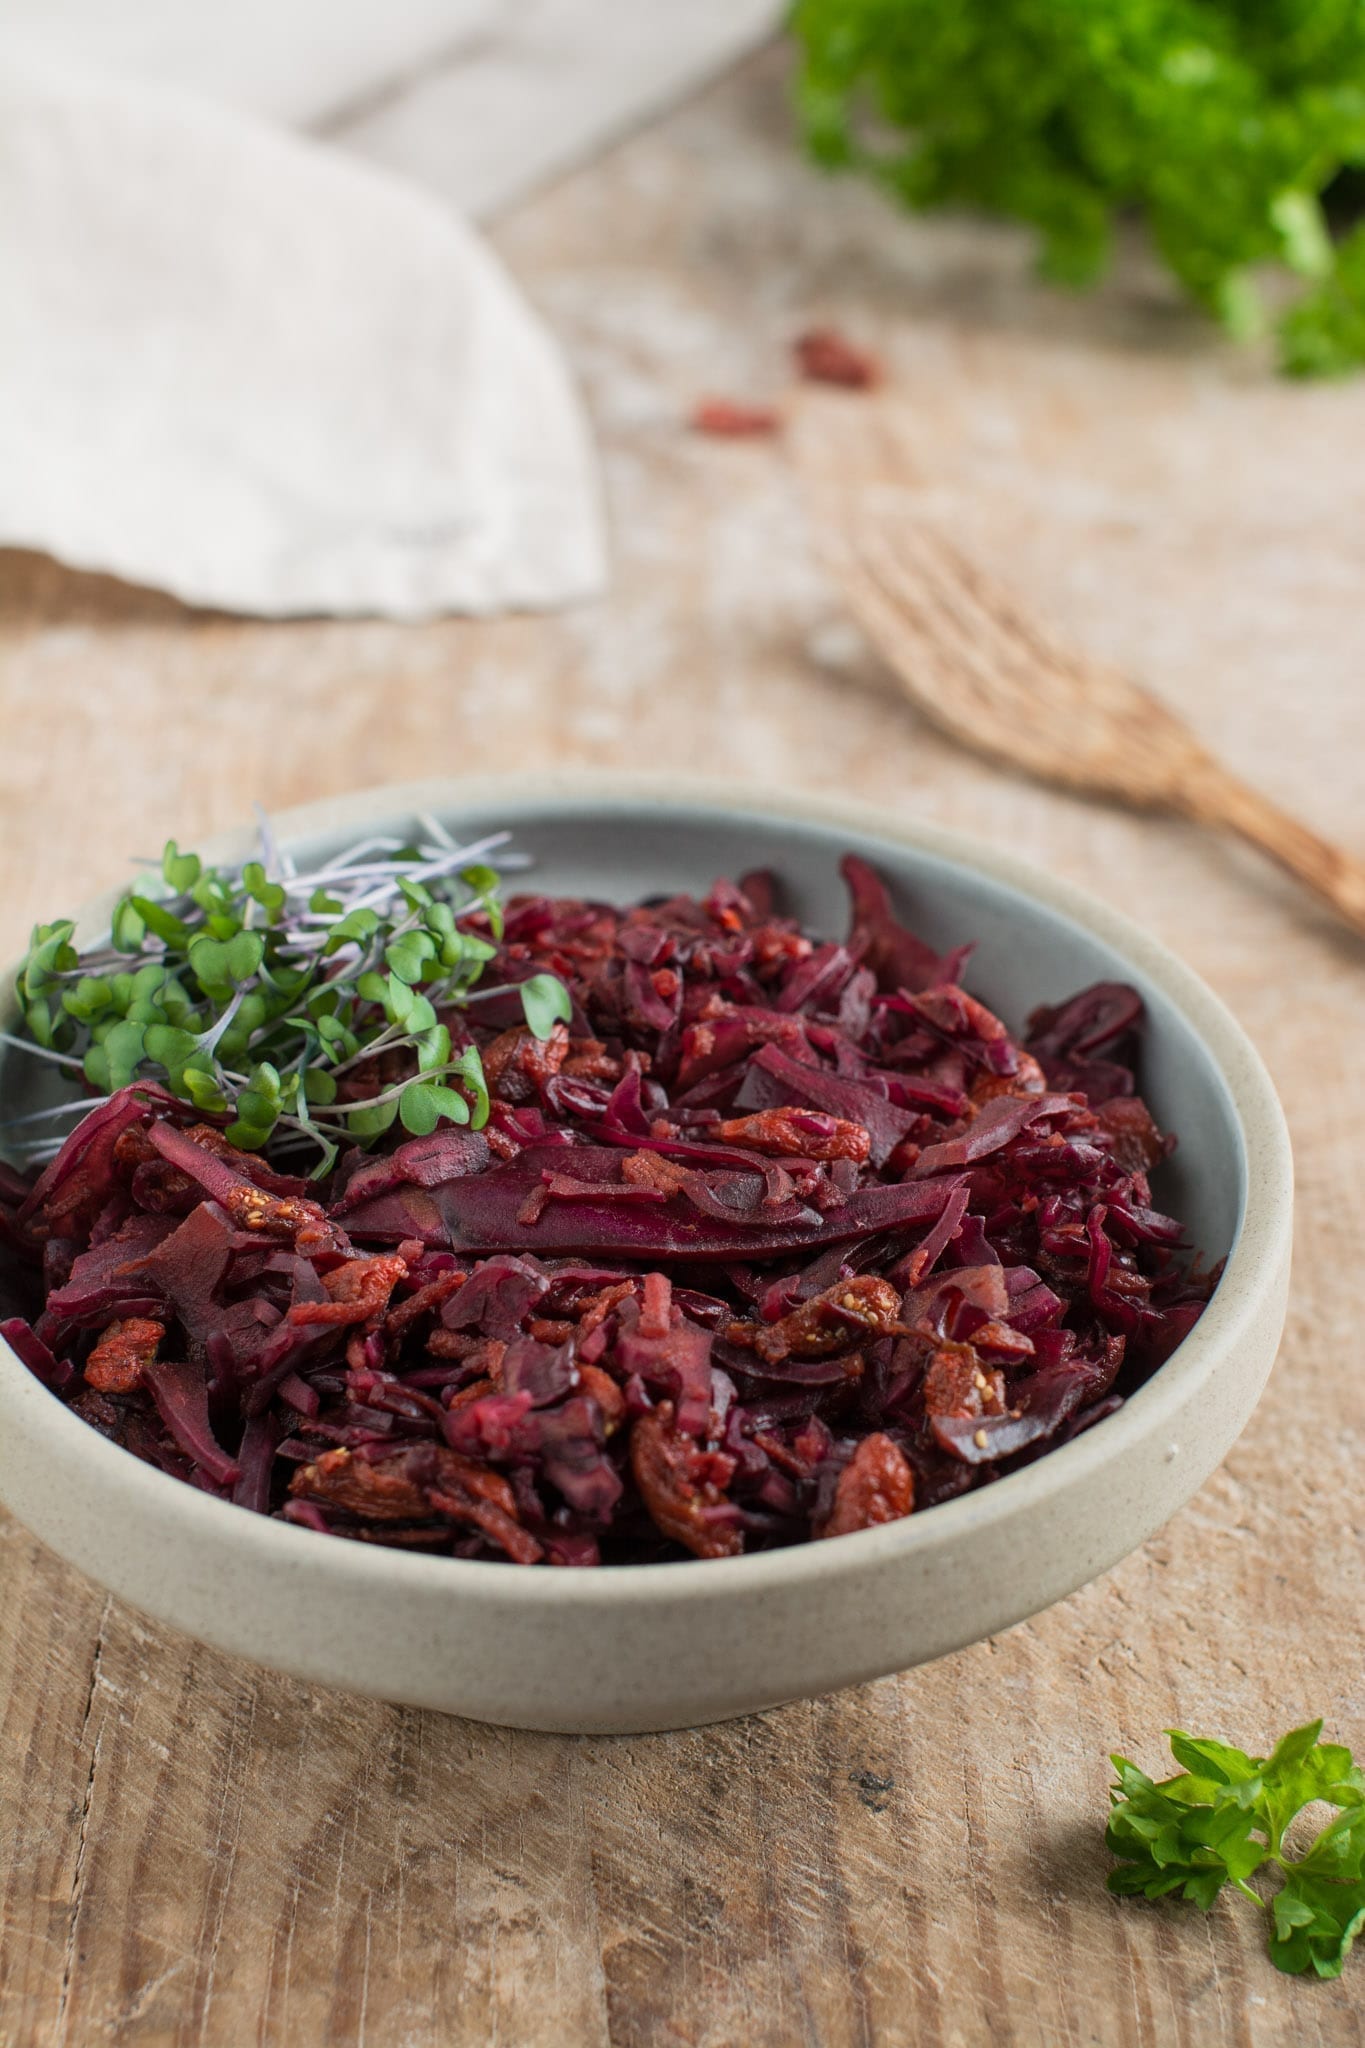 Vegan red cabbage coleslaw makes an excellent side dish packed with vitamins with an extra boost of friendly bacteria from miso paste.